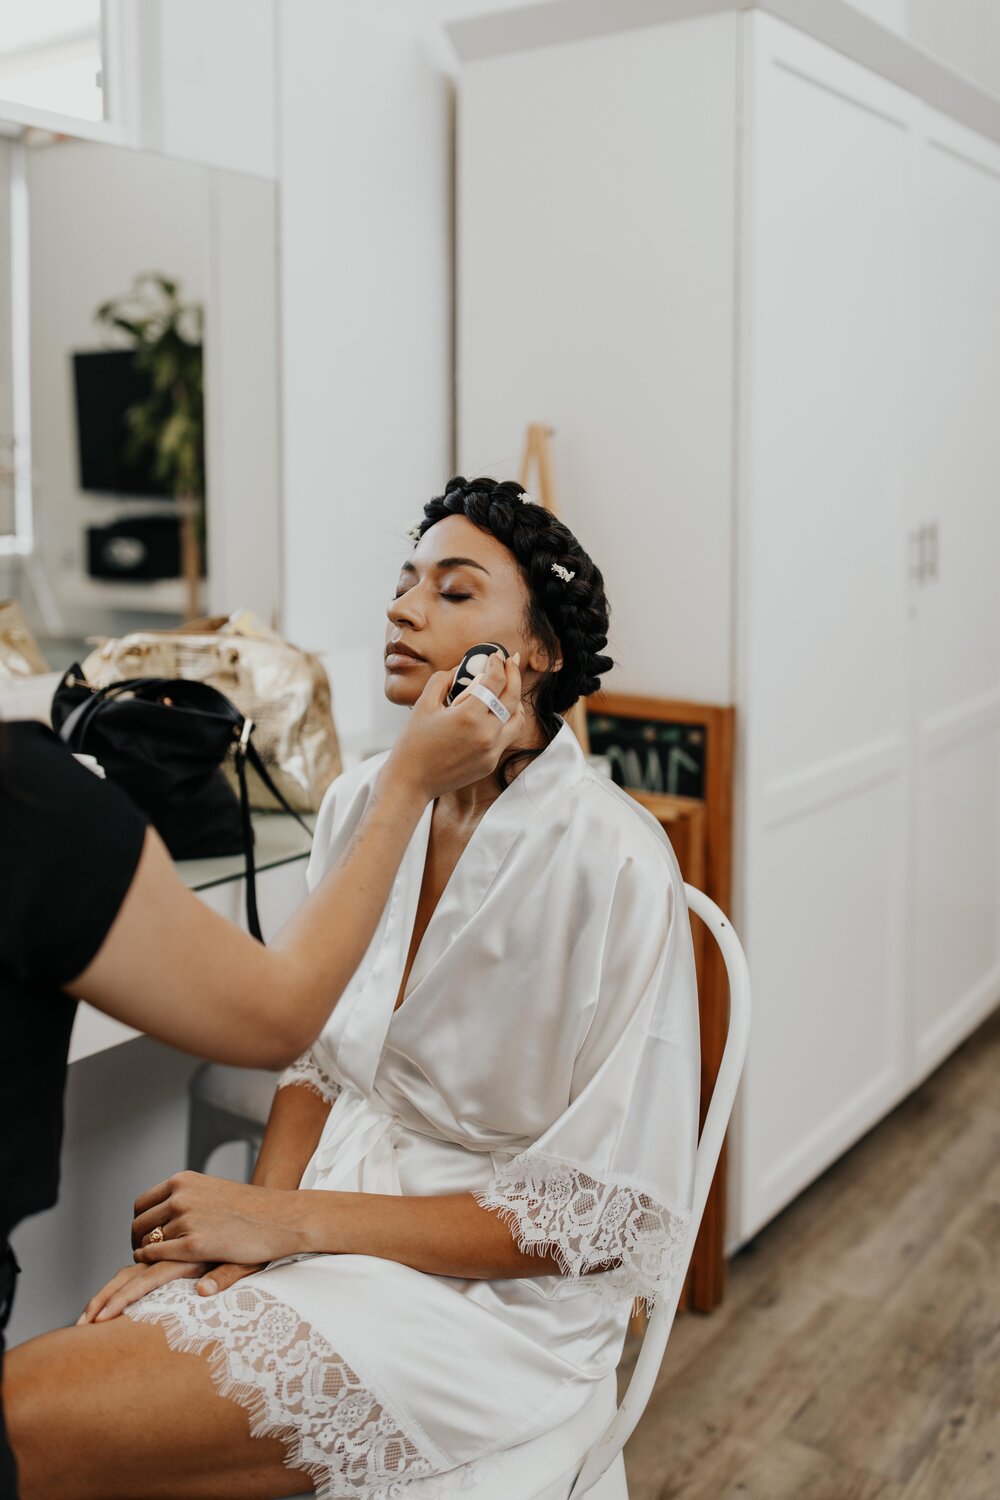  Top tips for beautiful getting ready photos by Hilary Kao Photo. This blog post includes wedding details, bridal fashion, wedding tips, bridal portraits. Book your Los Angeles wedding and browse the blog for more inspiration #photography #weddingplanning #weddingtips #weddingphotography #LosAngelesphotographer 